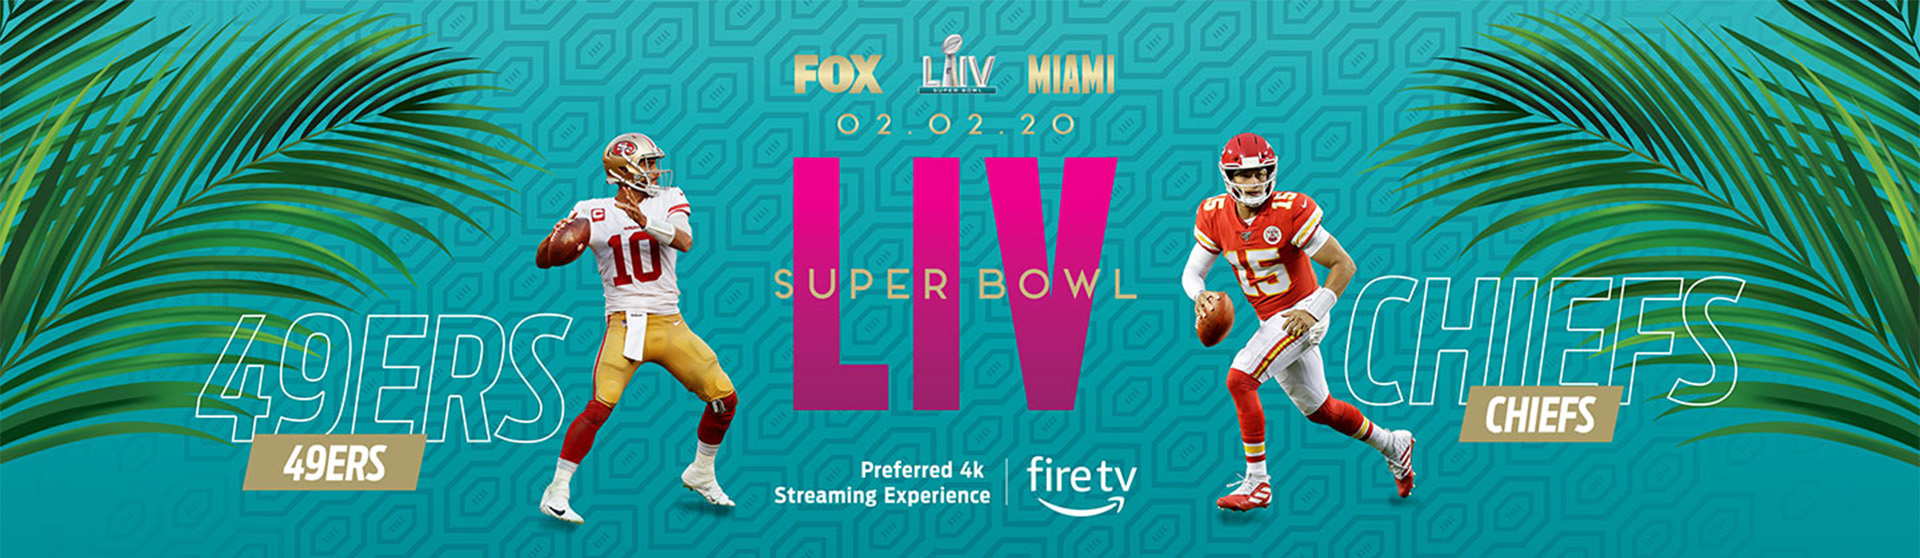 super bowl how to watch for free